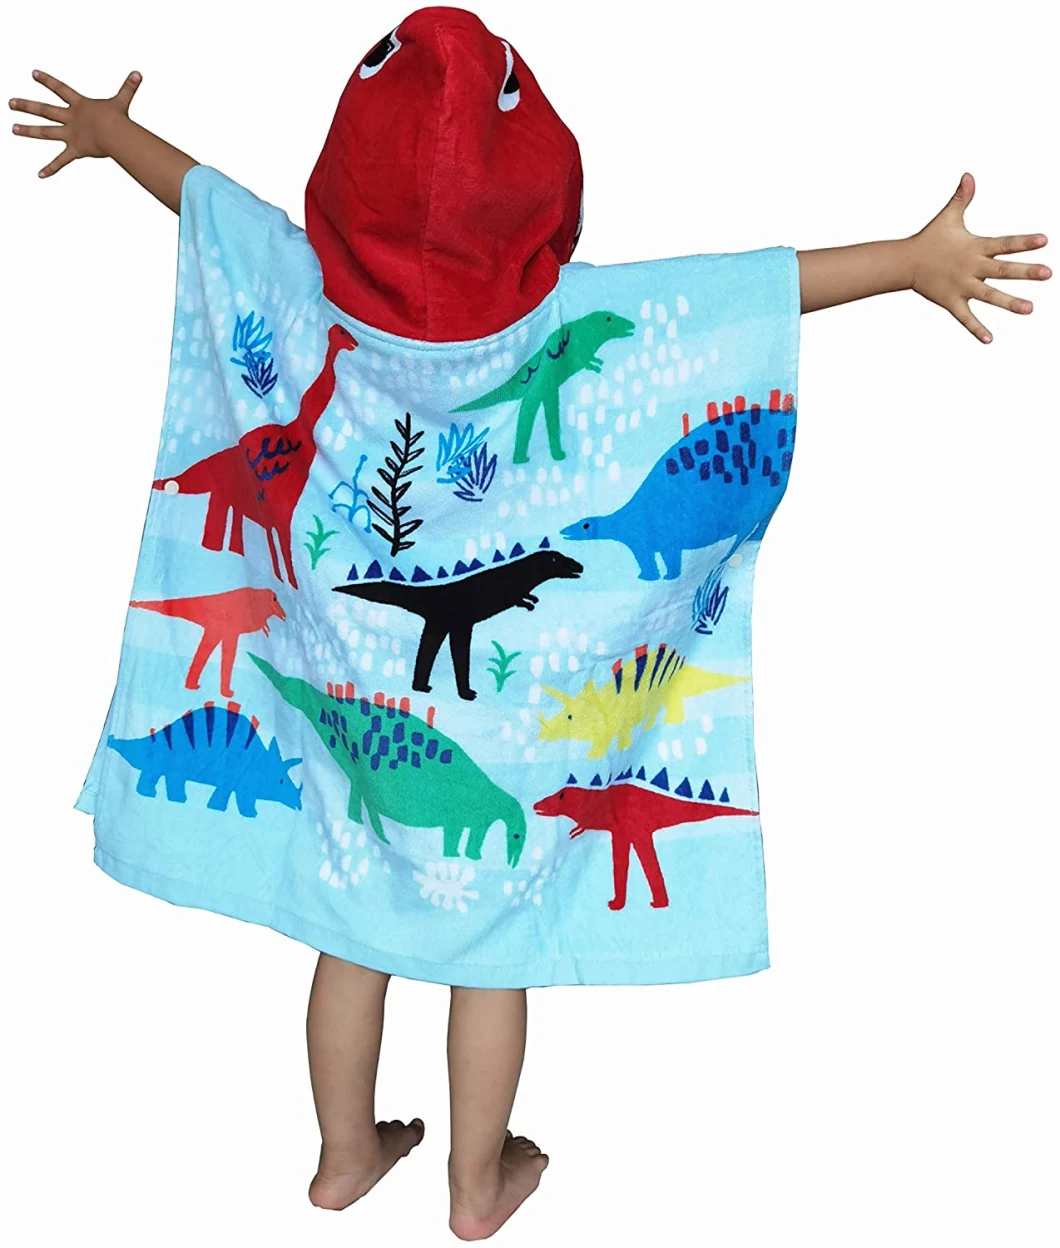 100% Cotton Kids Hooded Towel Poncho for Beach Pool Bath Swim Boating Surfing Cover-up Cape for Boys and Girls Toddlers, Dinosaurs with Hooded